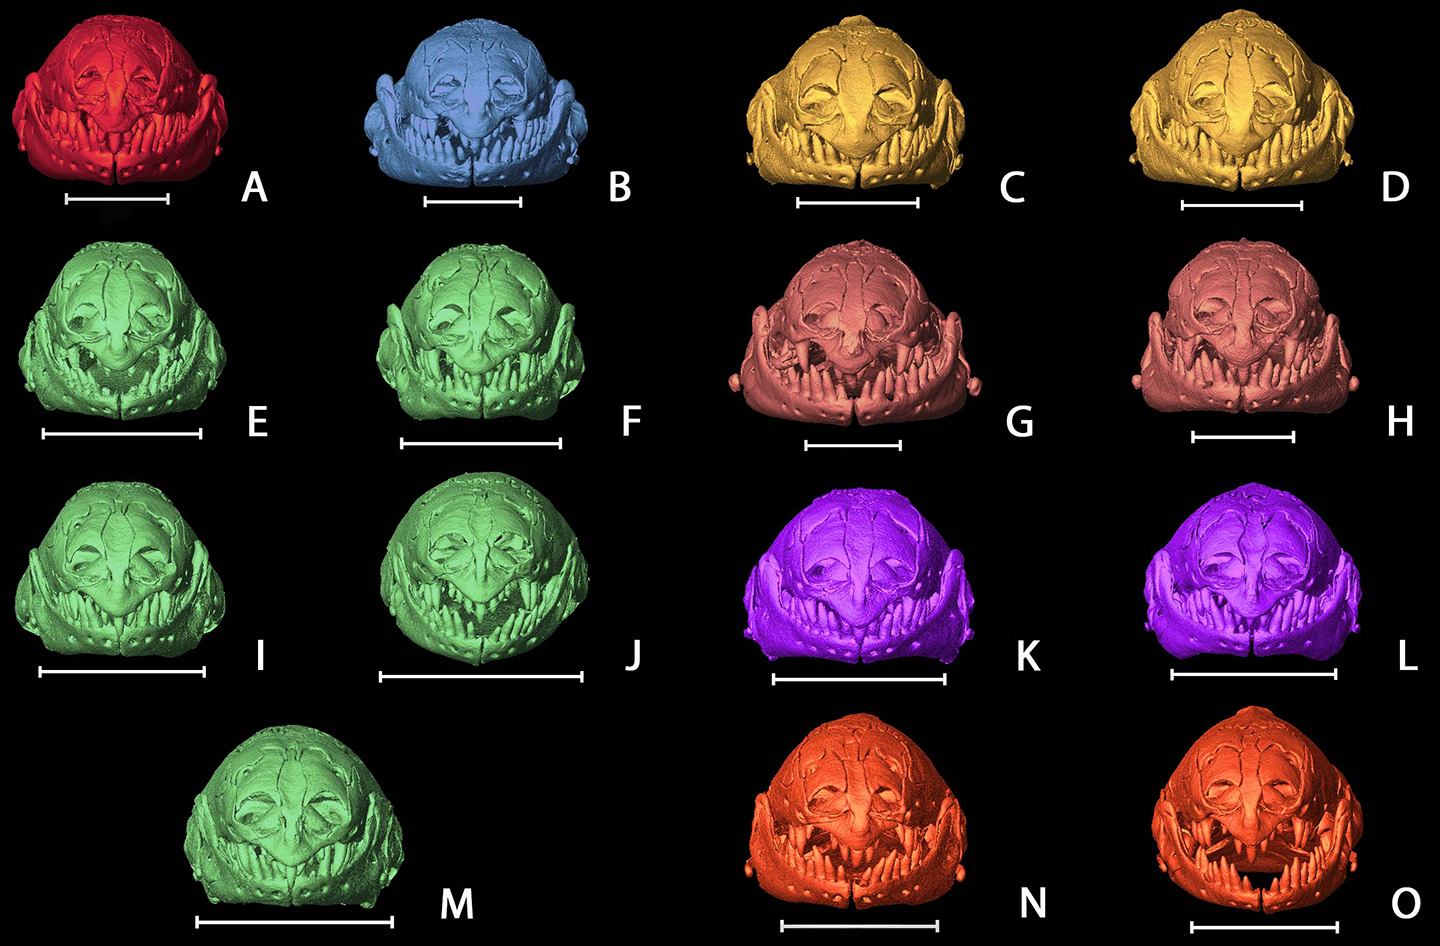 a composite images showing 15 CT scans of different worm-lizard skulls, showing the variety of skull structures